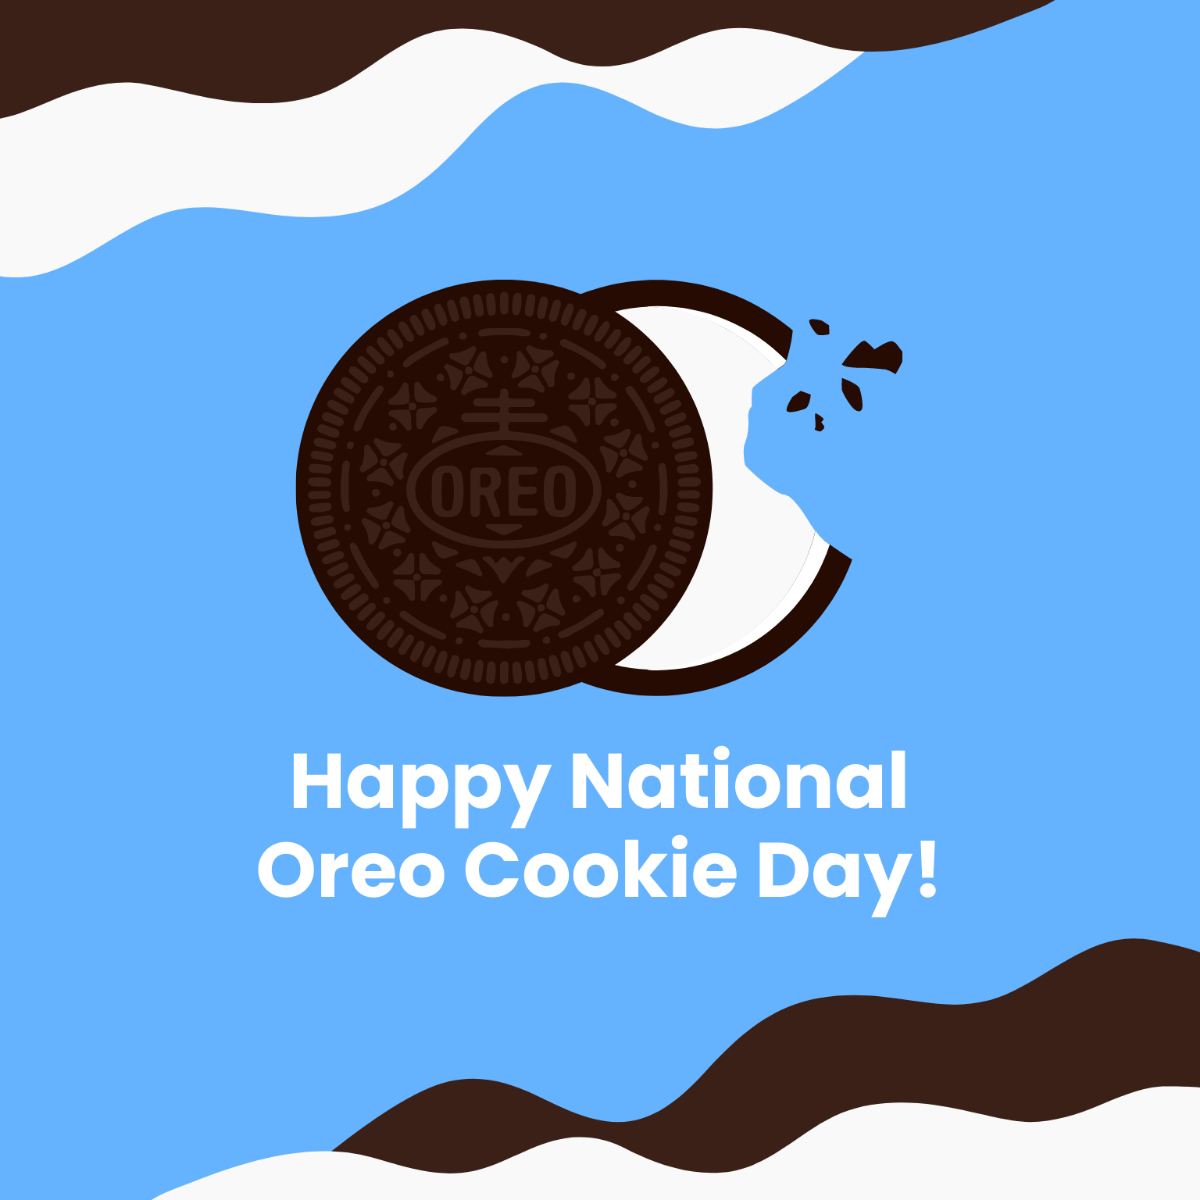 Happy National Oreo Cookie Day Illustration